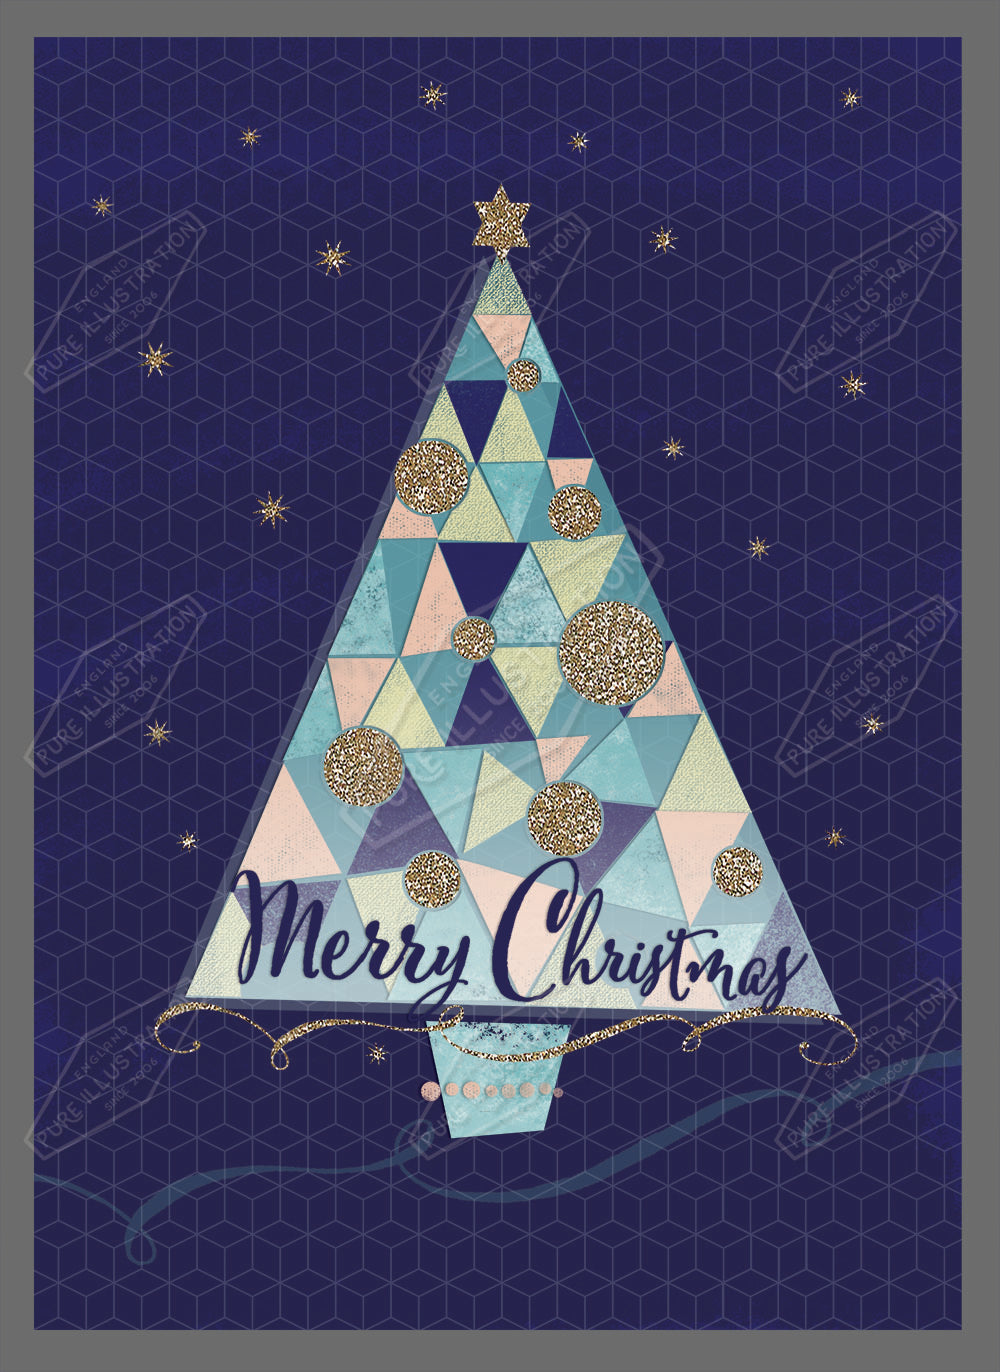 00030182SLA- Sarah Lake is represented by Pure Art Licensing Agency - Christmas Greeting Card Design